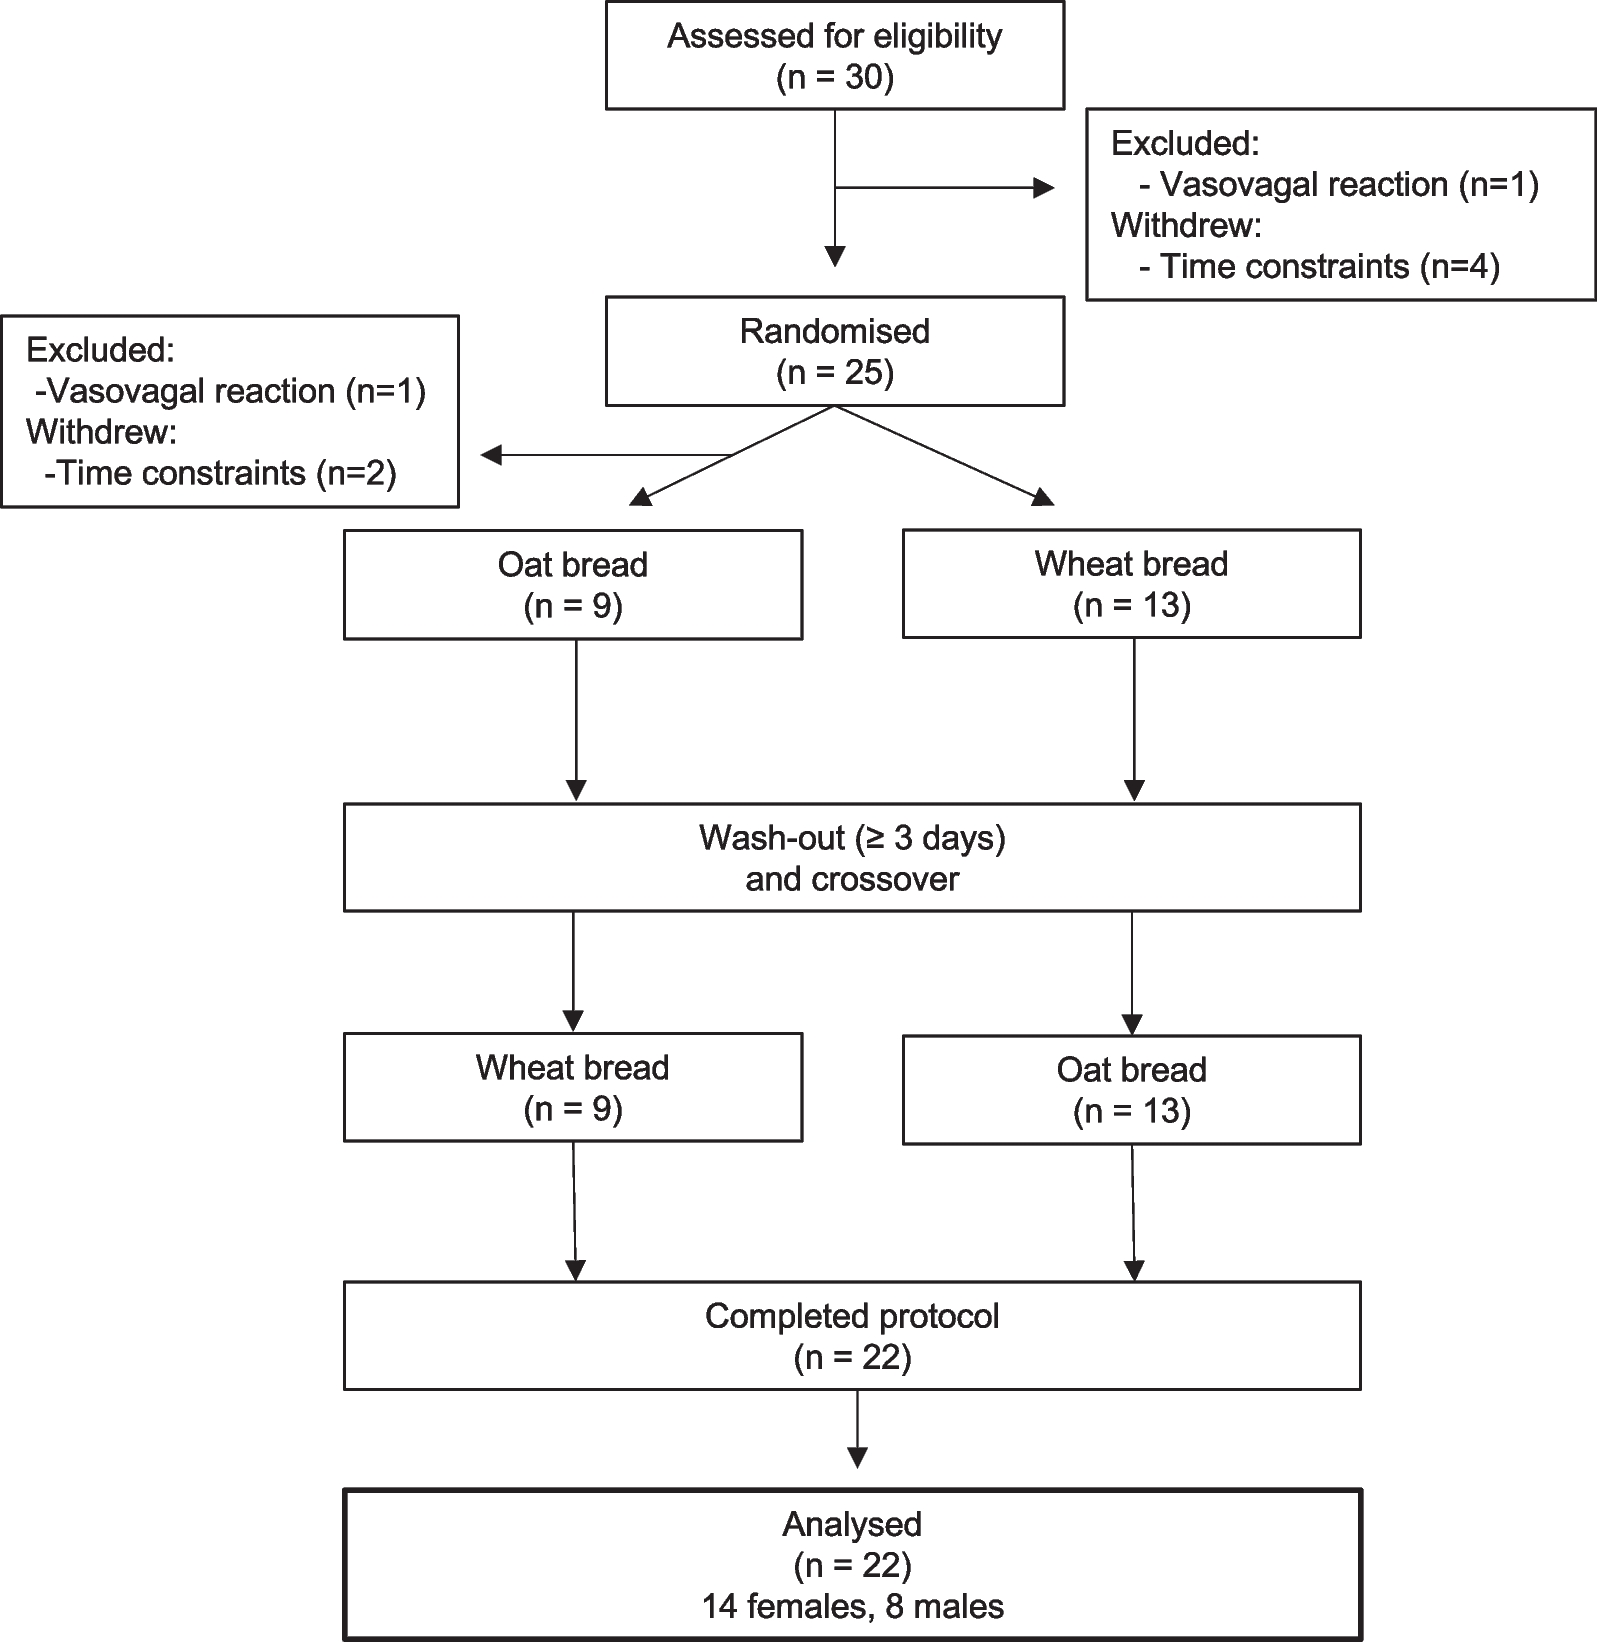 The acute effect of a β-glucan-enriched oat bread on gastric emptying, GLP-1 response, and postprandial glycaemia and insulinemia: a randomised crossover trial in healthy adults